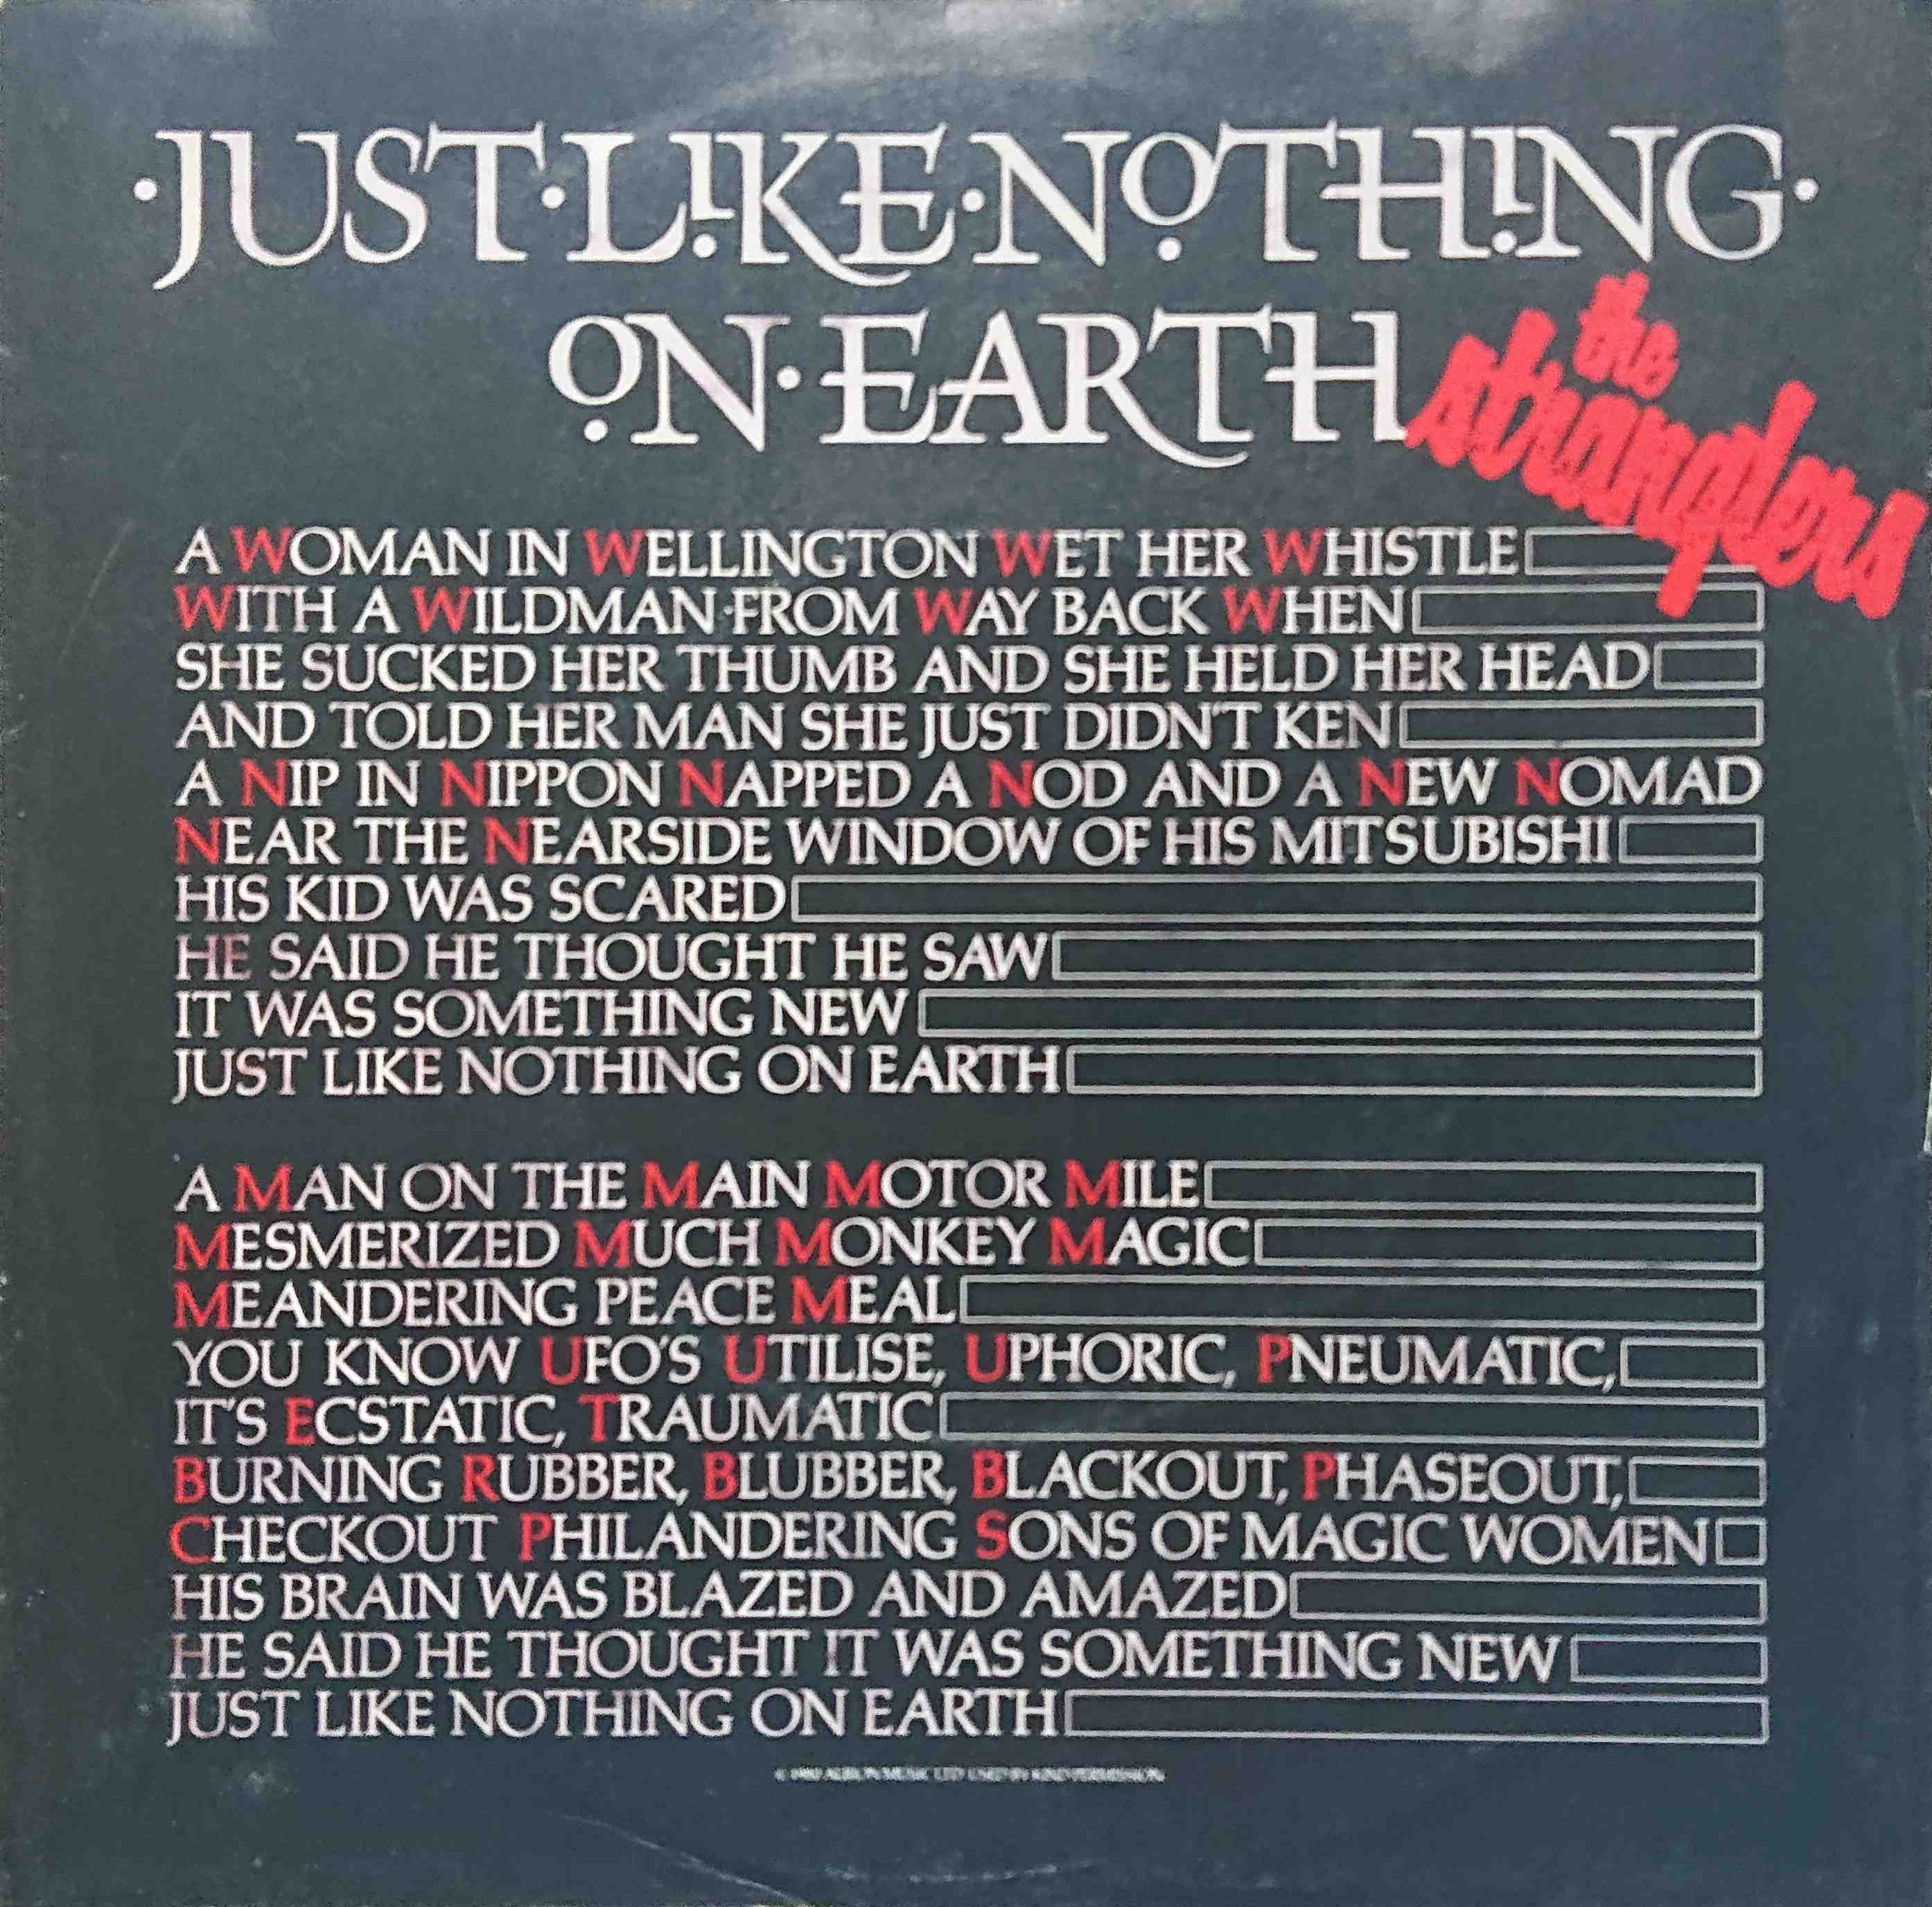 Picture of Just like nothing on Earth by artist The Stranglers from The Stranglers singles